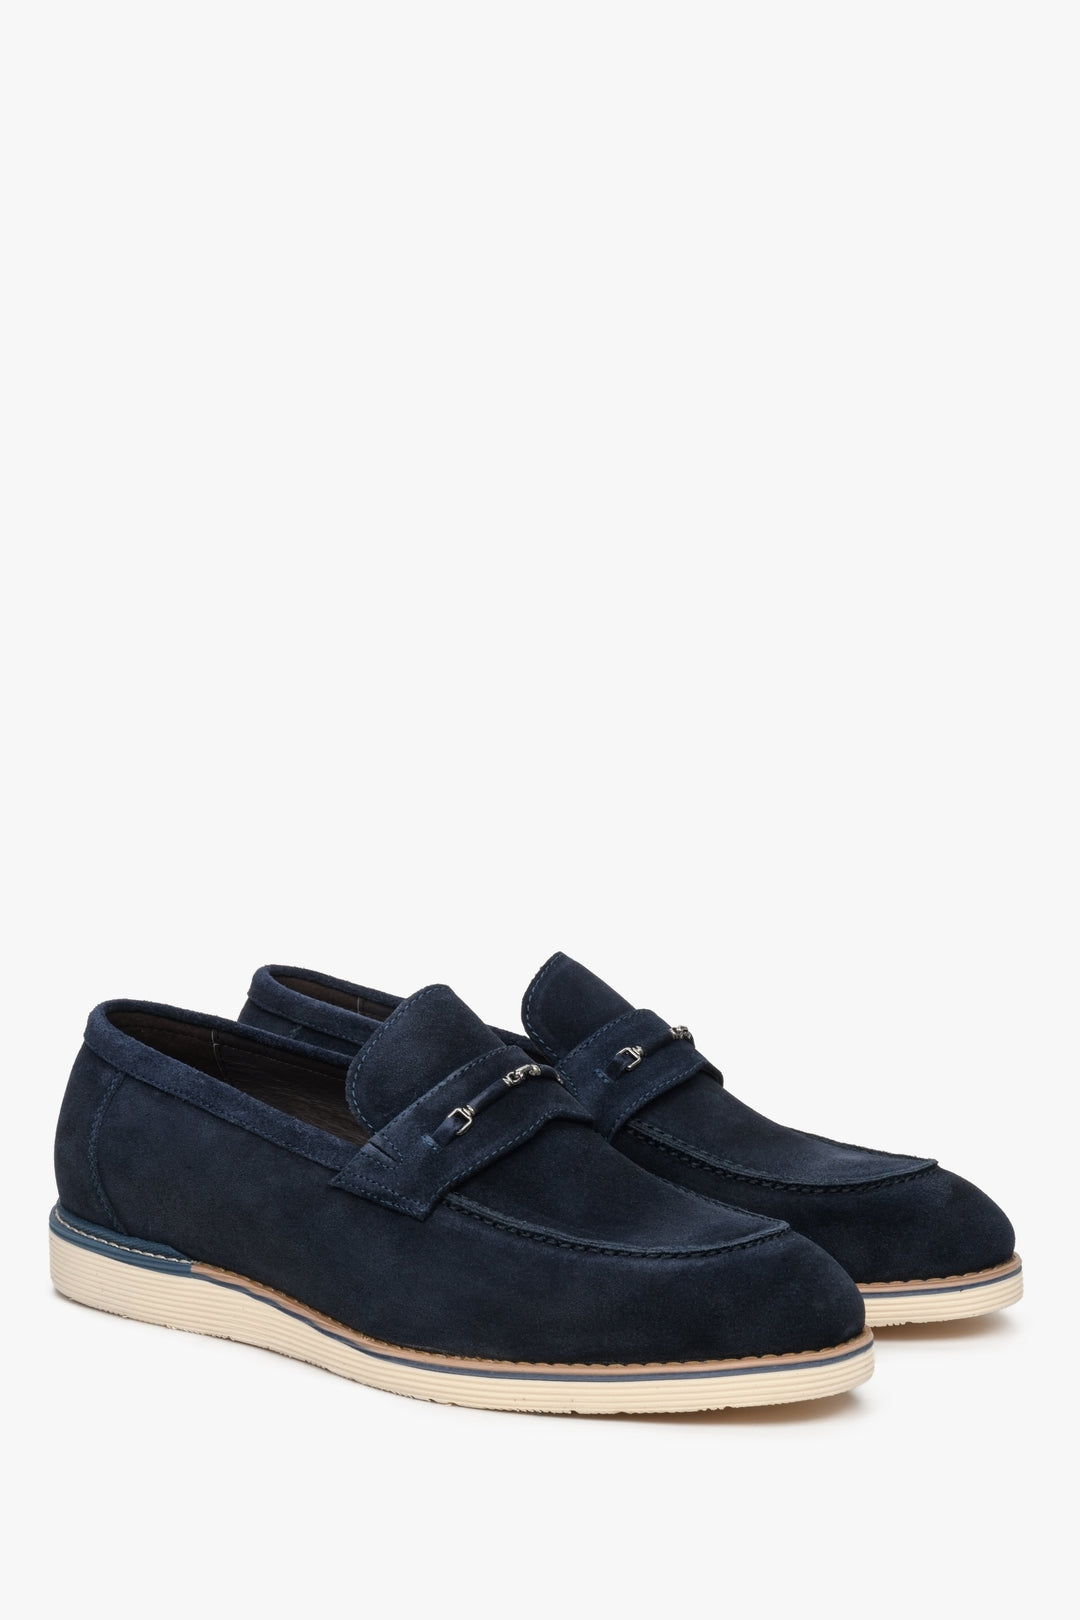 Men's navy blue velour loafers - presentation of the toe and side seam of the shoes.